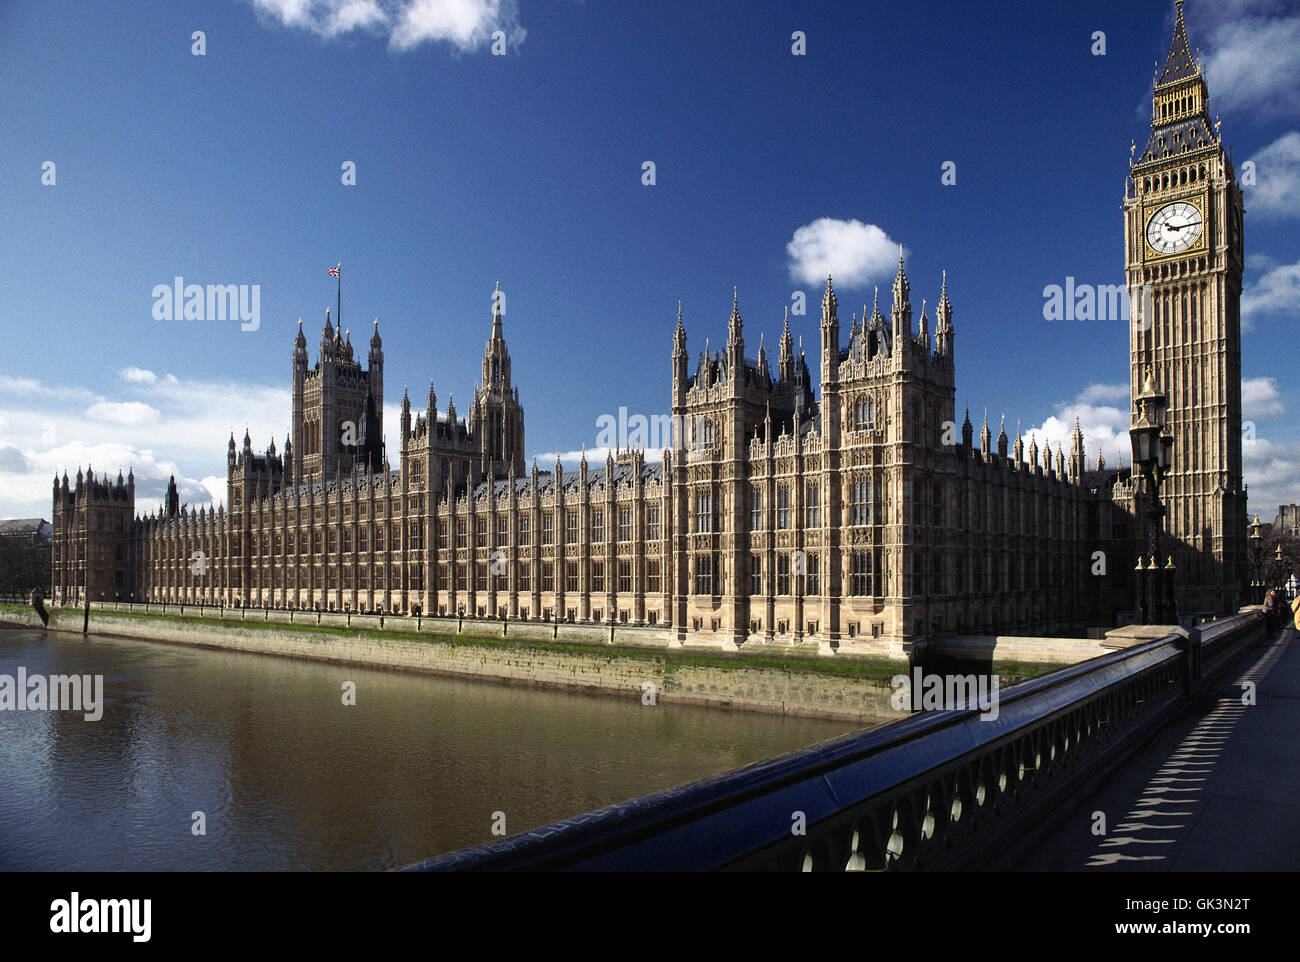 ca. 1980-1995, London, England, UK --- Big Ben and the Houses of Parliament, also known as the New Palace of Westminster, situat Stock Photo